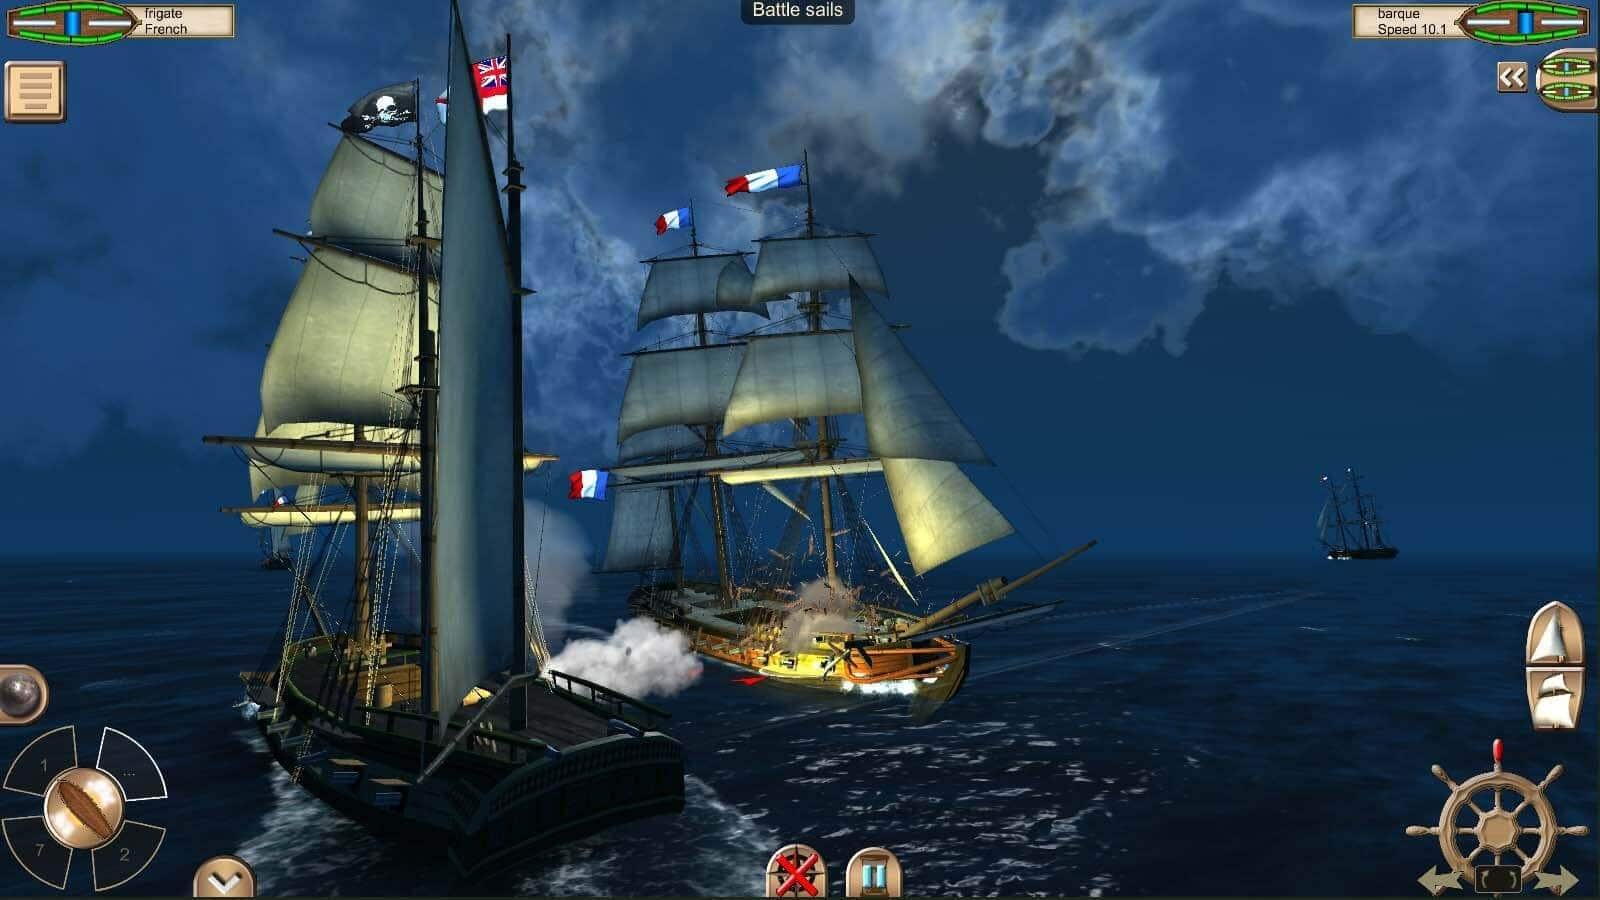 Download The Pirate- Caribbean Hunt Mod